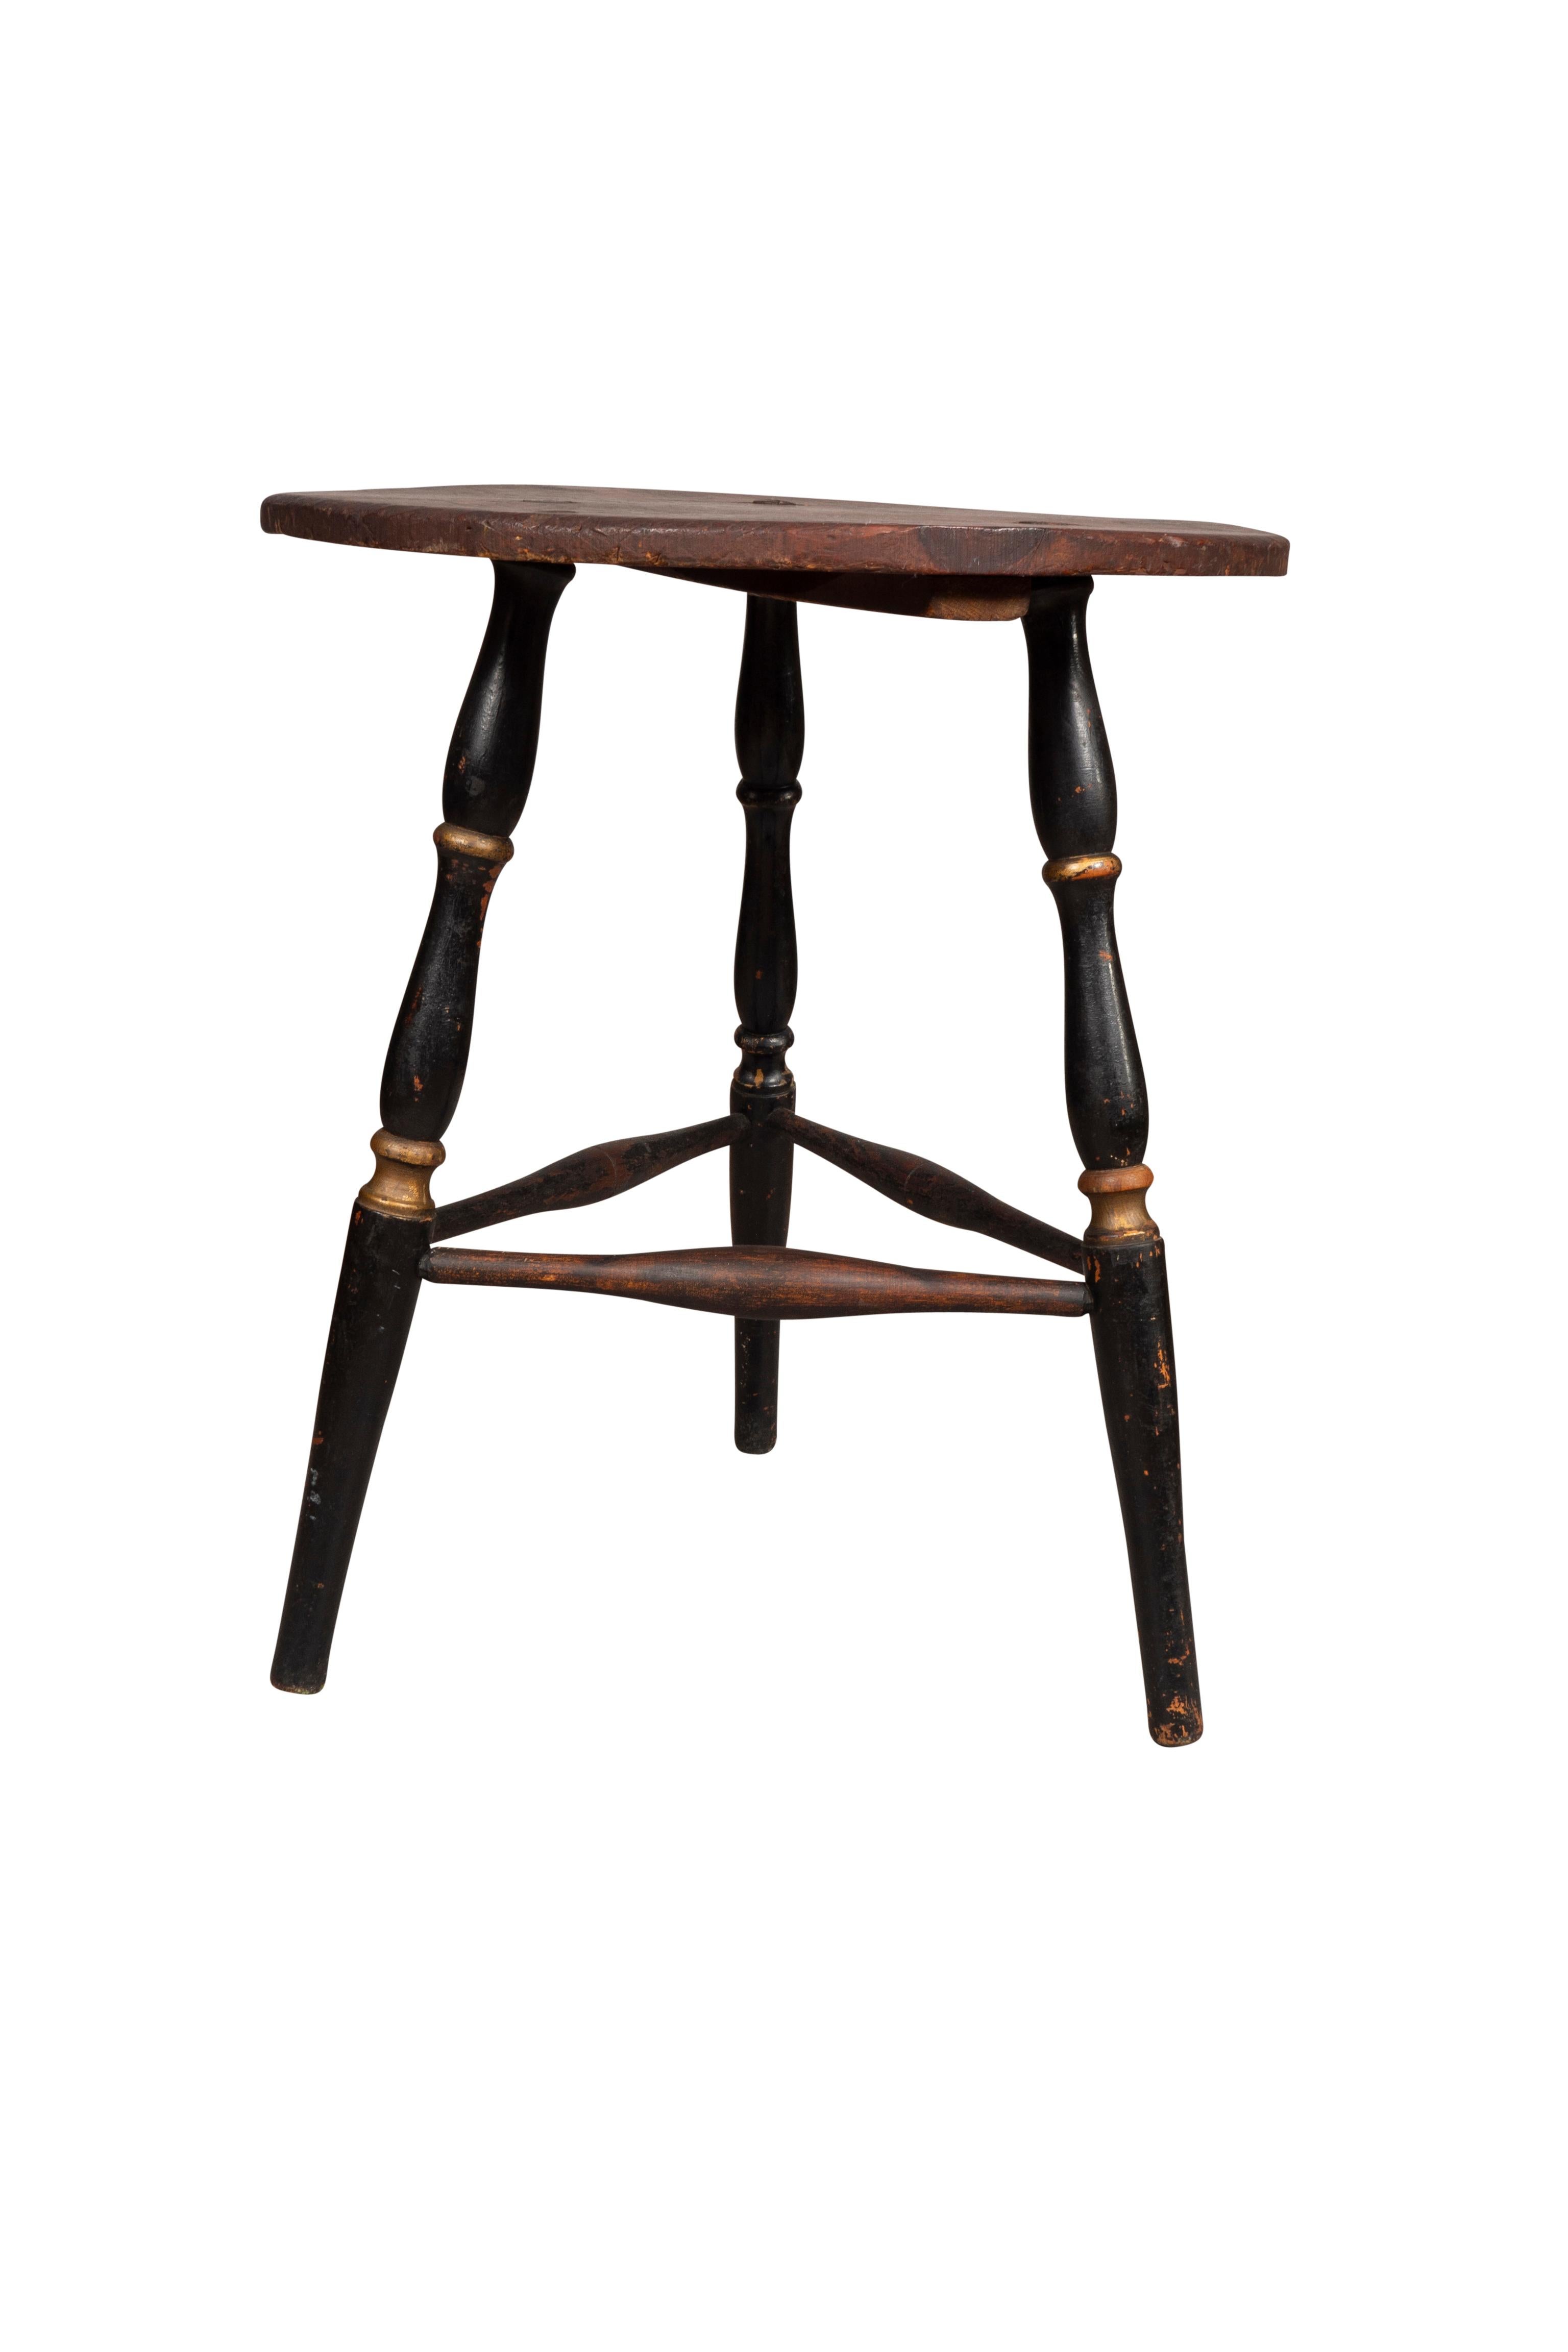 Scrubbed pine top with stains and scratches with three bamboo turned black painted legs with turned stretchers. New England origin.